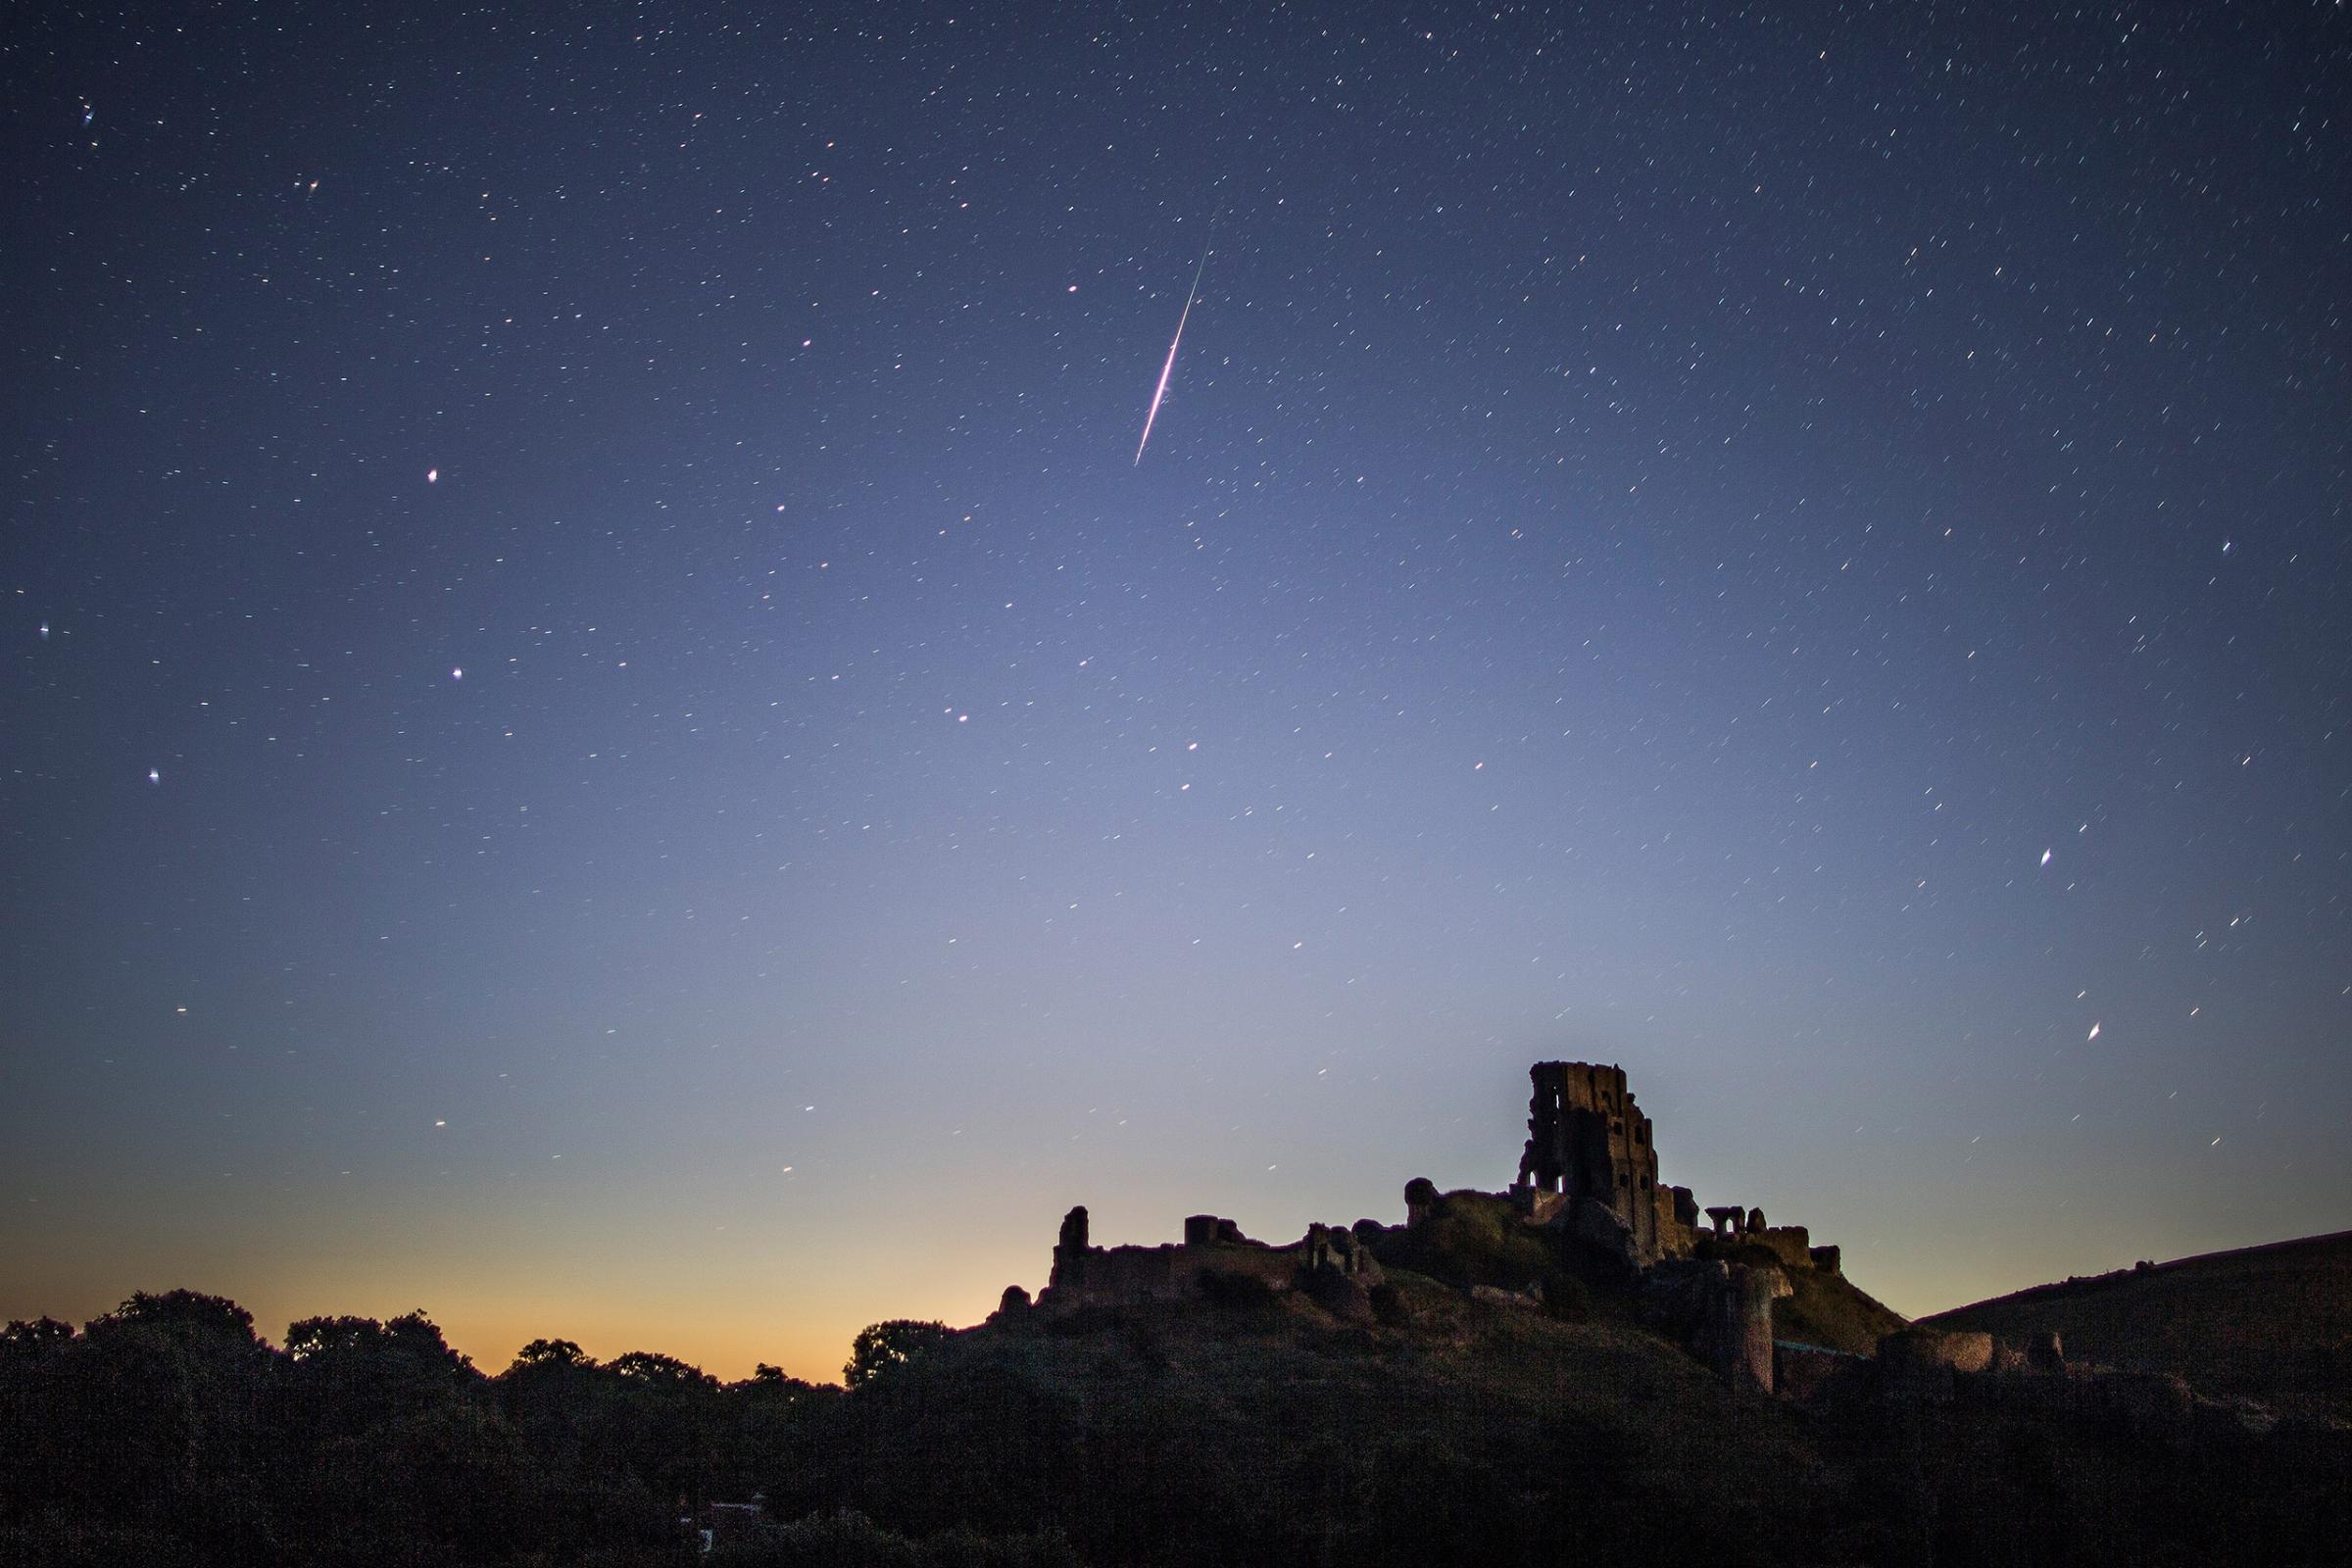 A Perseid meteor flashes across the night sky above Corfe Castle, United Kingdom, on Aug. 12, 2016.